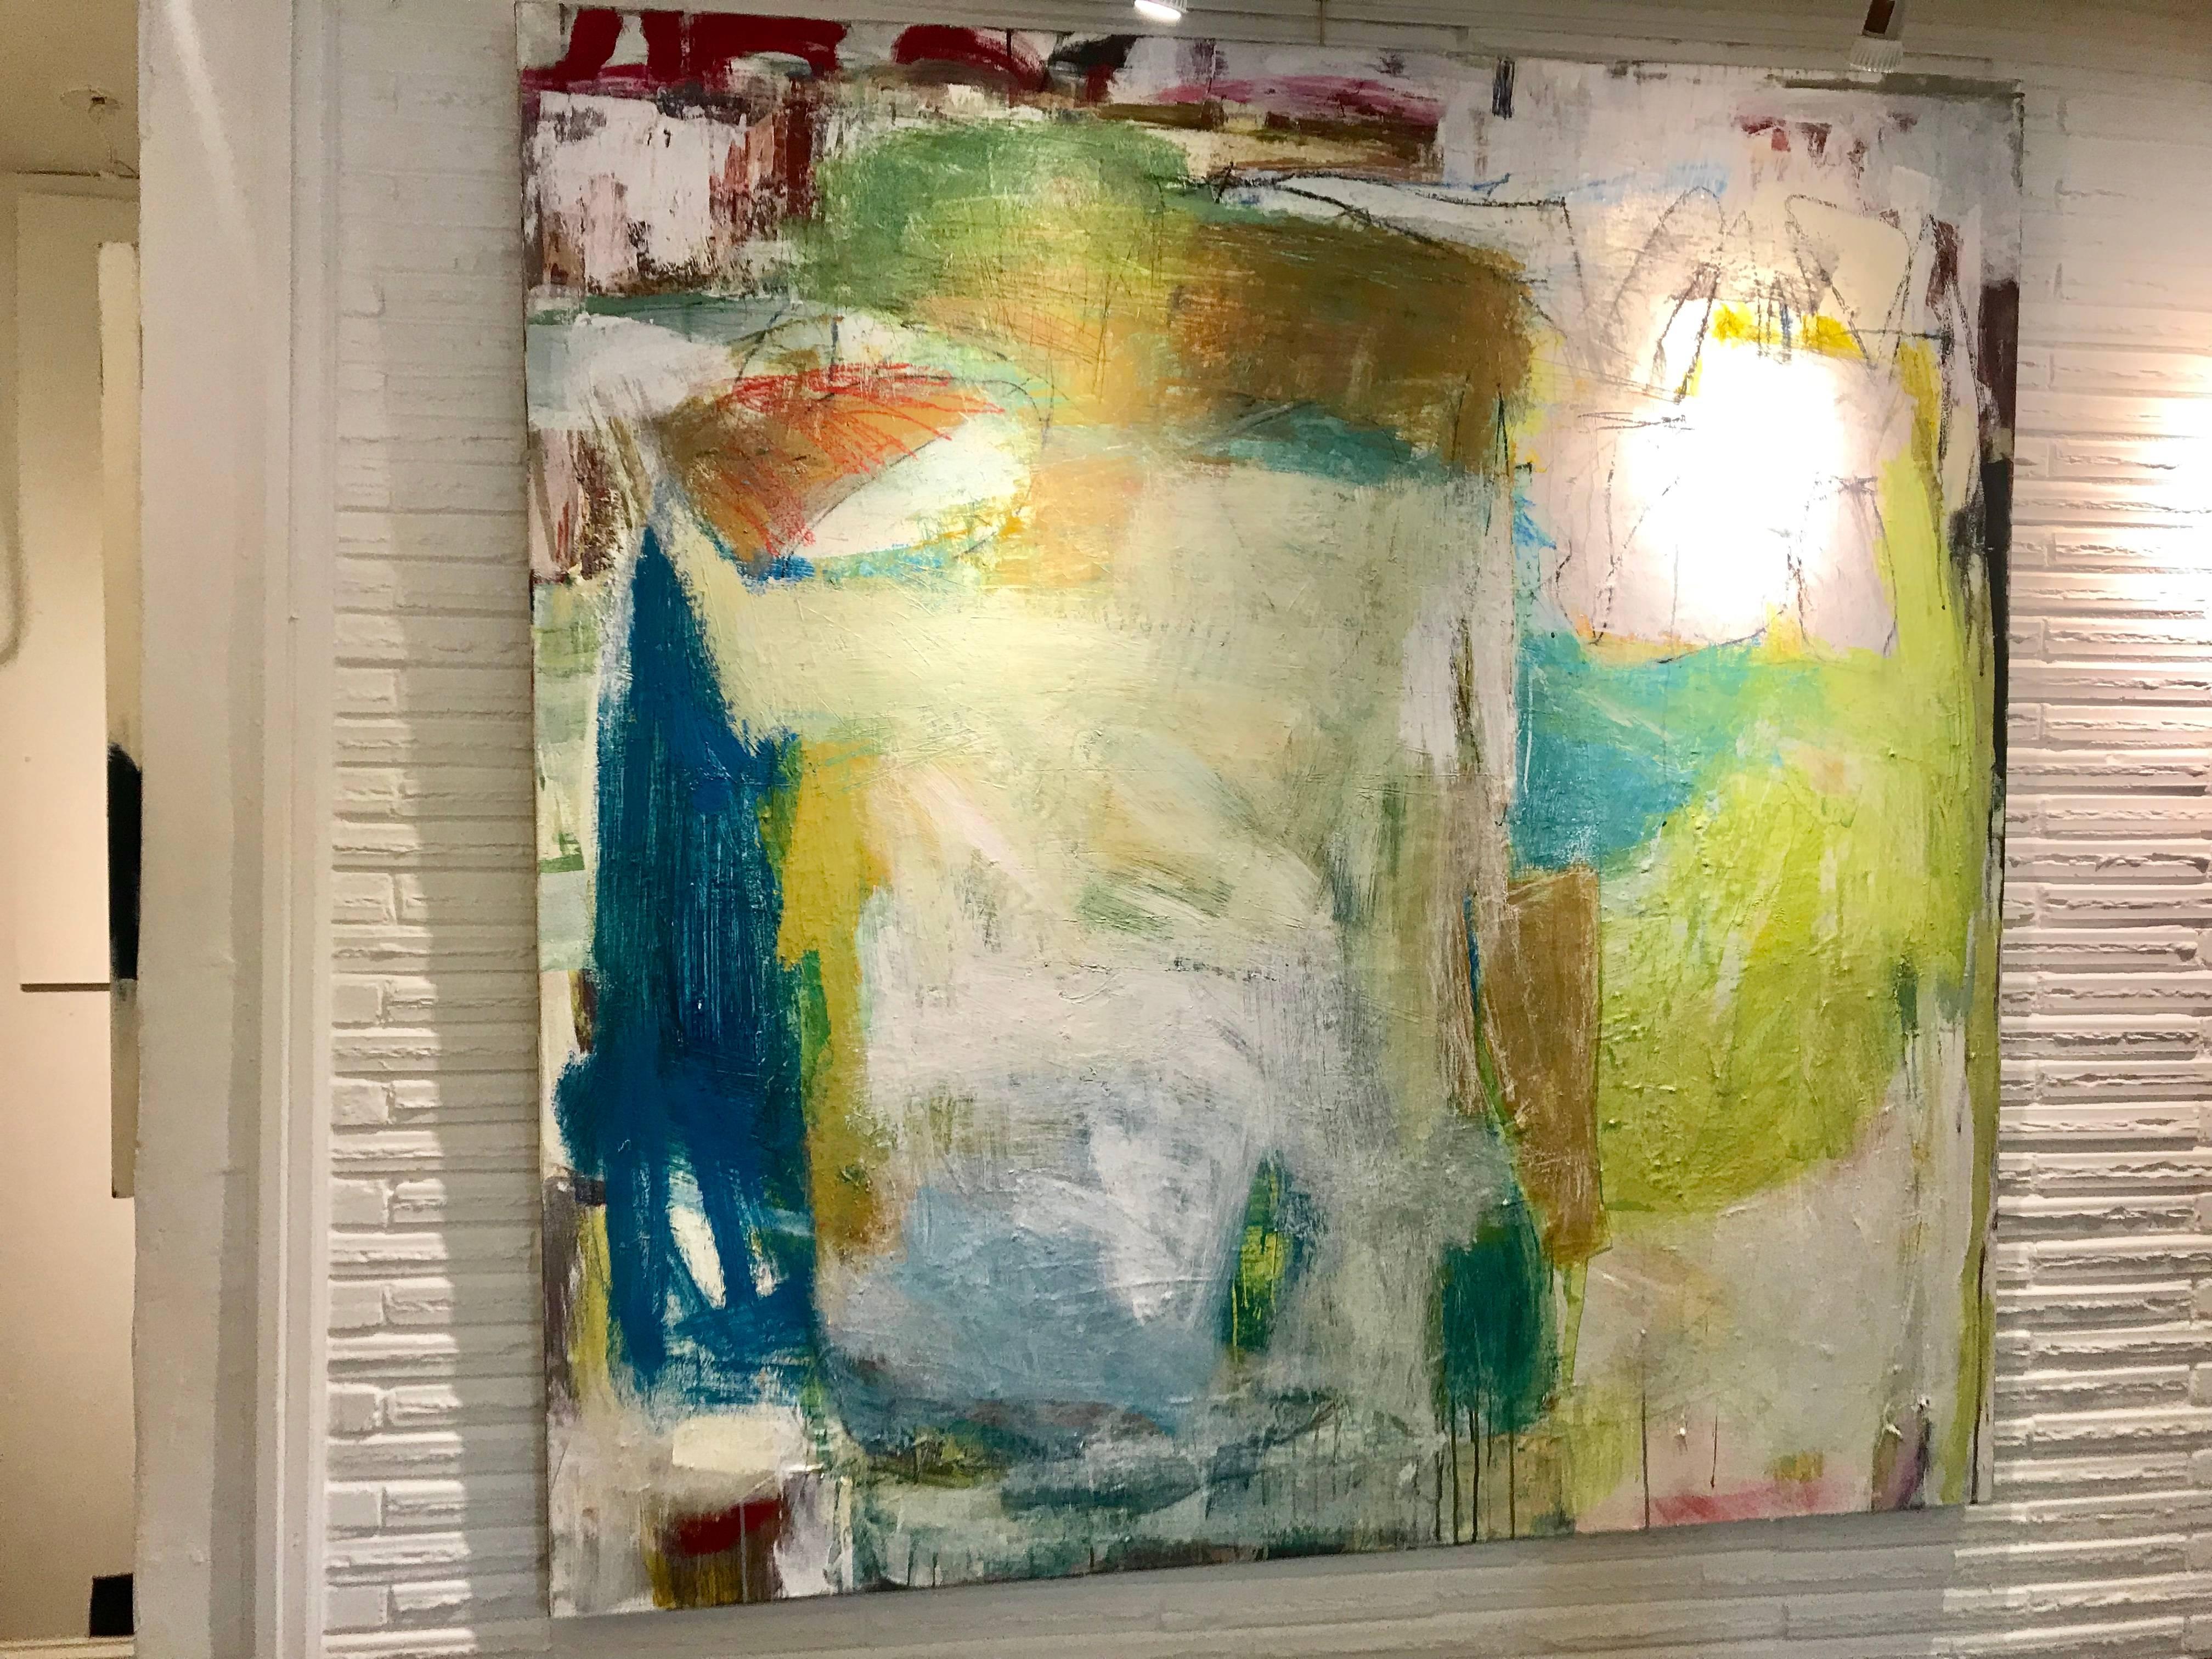 'Wait for Me' is a large abstract acrylic and mixed media on canvas painting of square format, created by American artist Ellen Rolli in 2018. Featuring a vibrant palette made of chartreuse, teal, brown and red tones alternating with white touches,